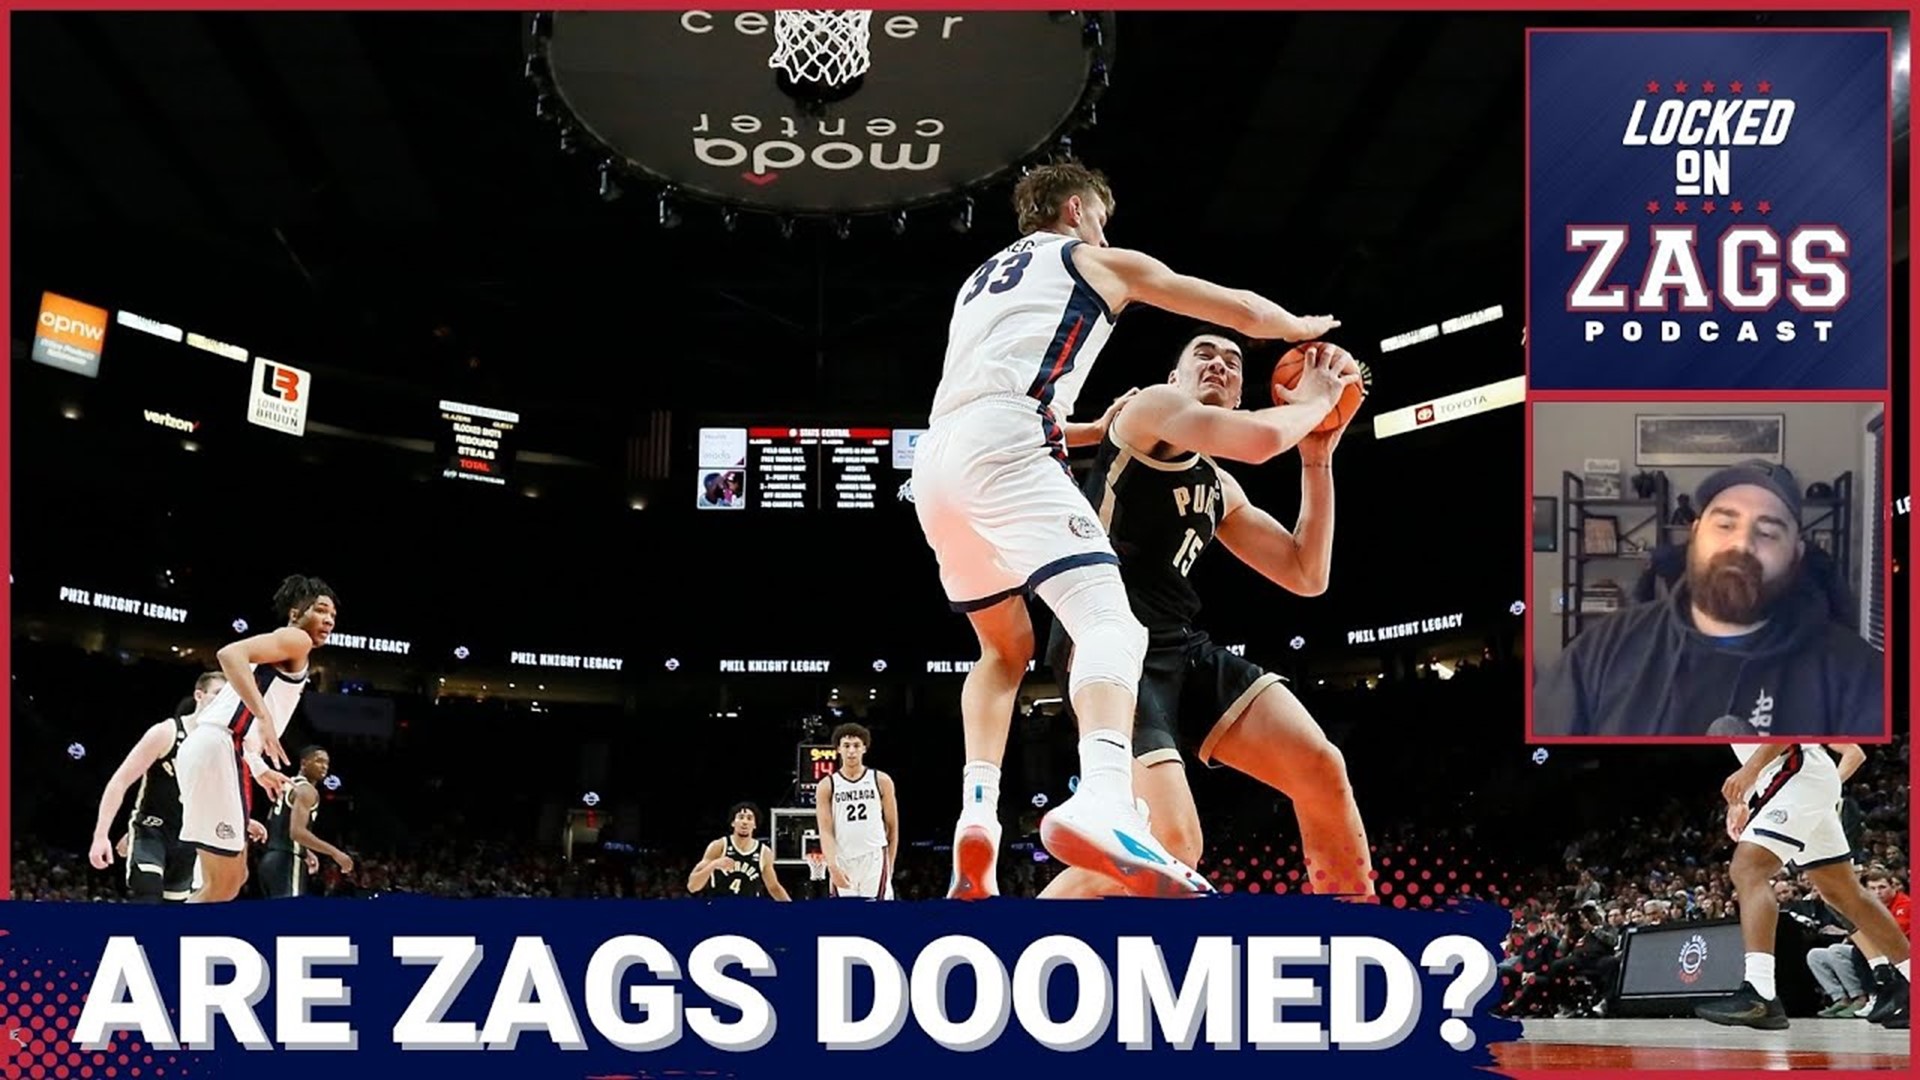 Gonzaga has two losses before the calendar flips to December, unfamiliar territory for Mark Few's club. Here's what the Zags need to do to prepare for Baylor.